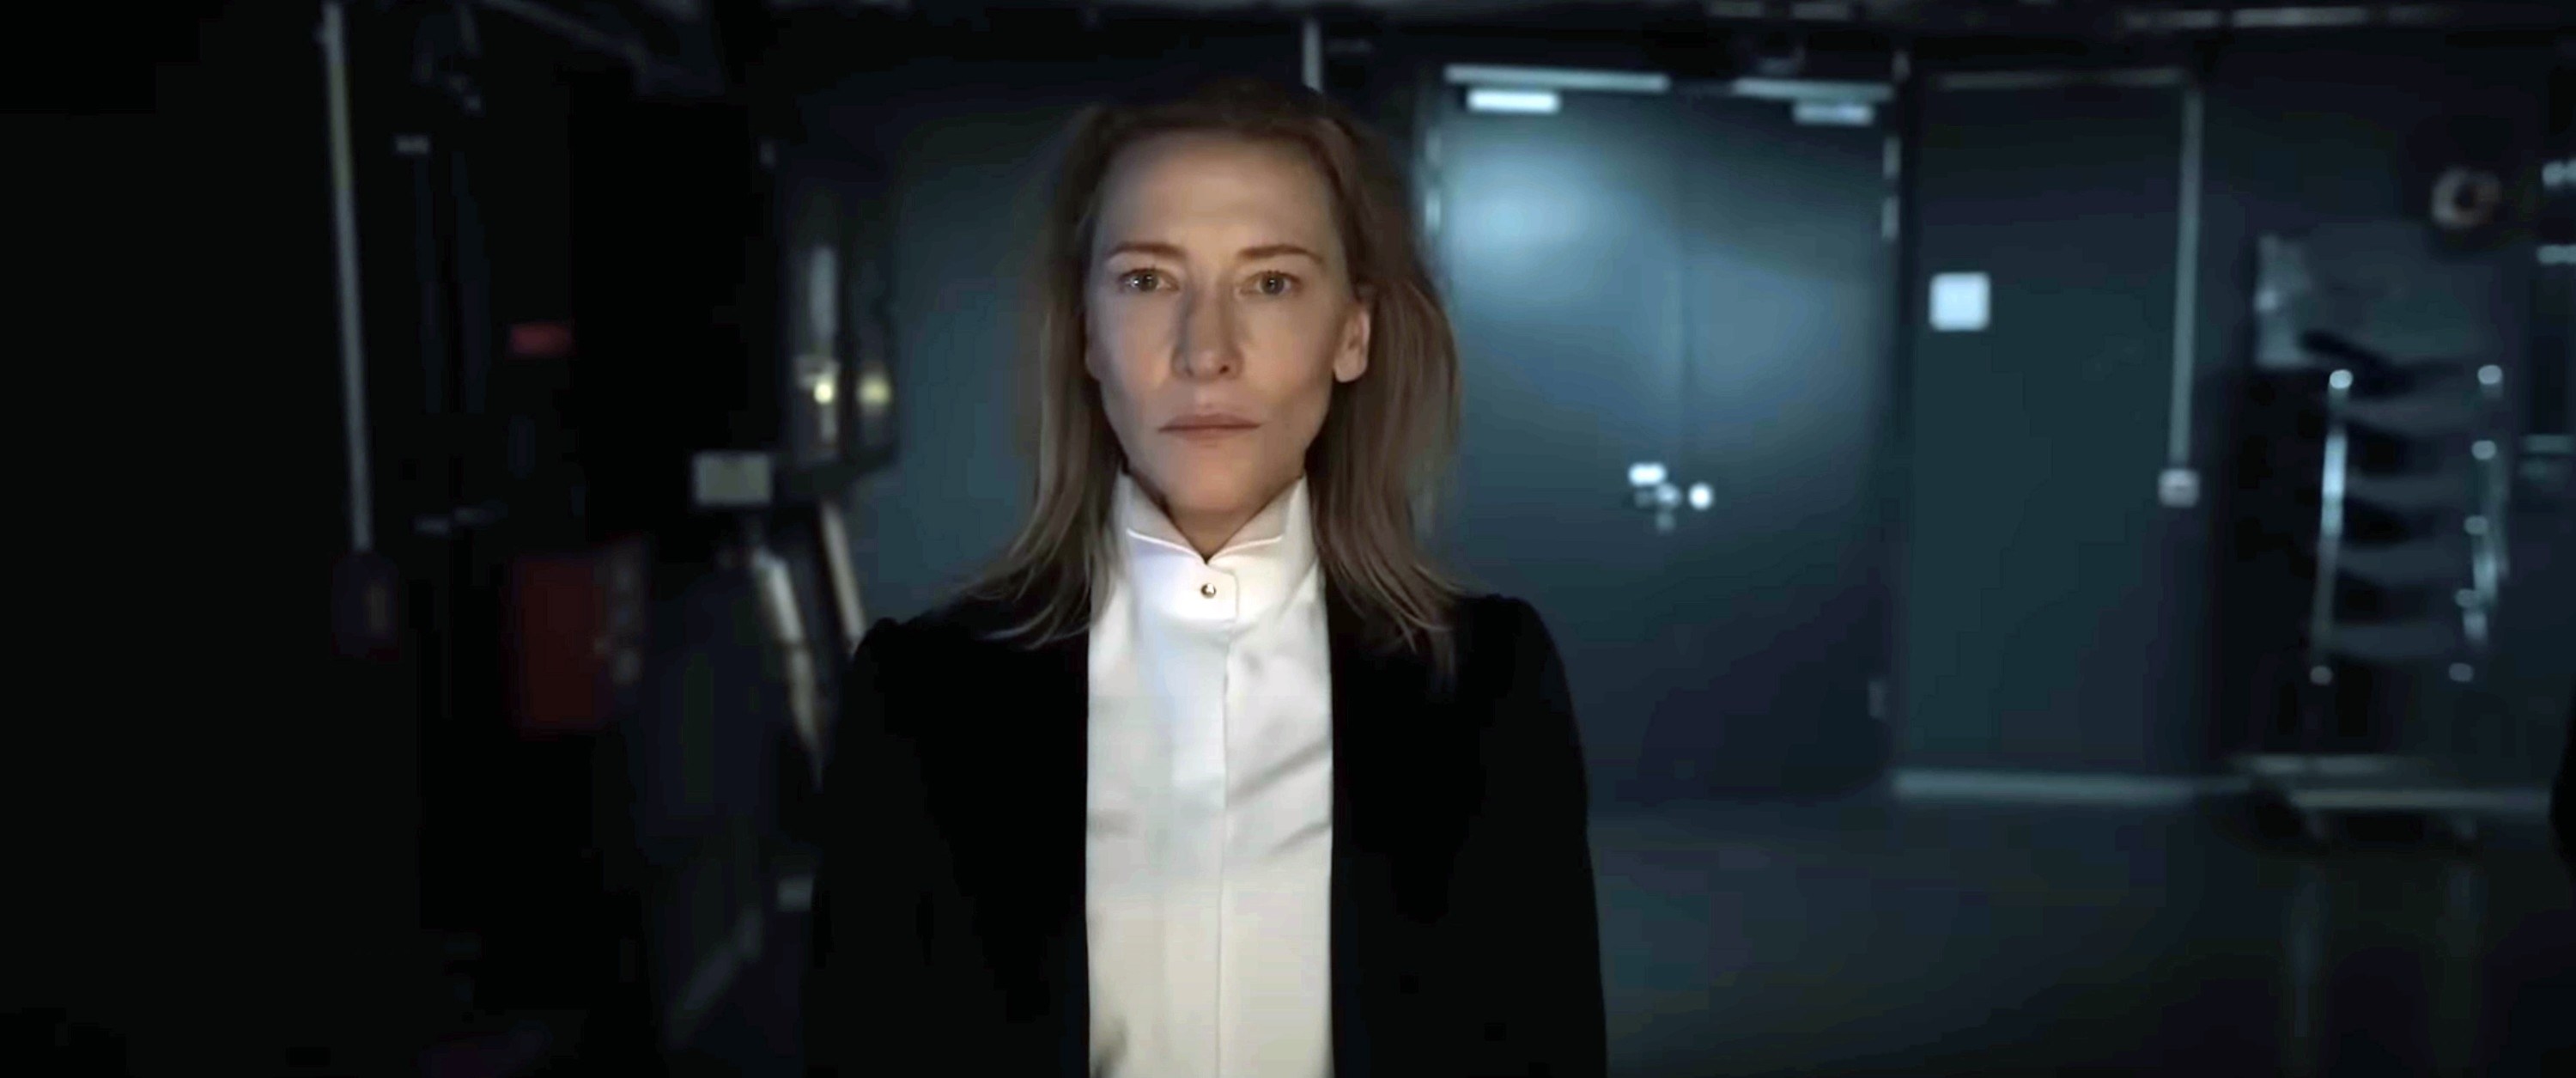 Cate Blanchett waits backstage to conduct